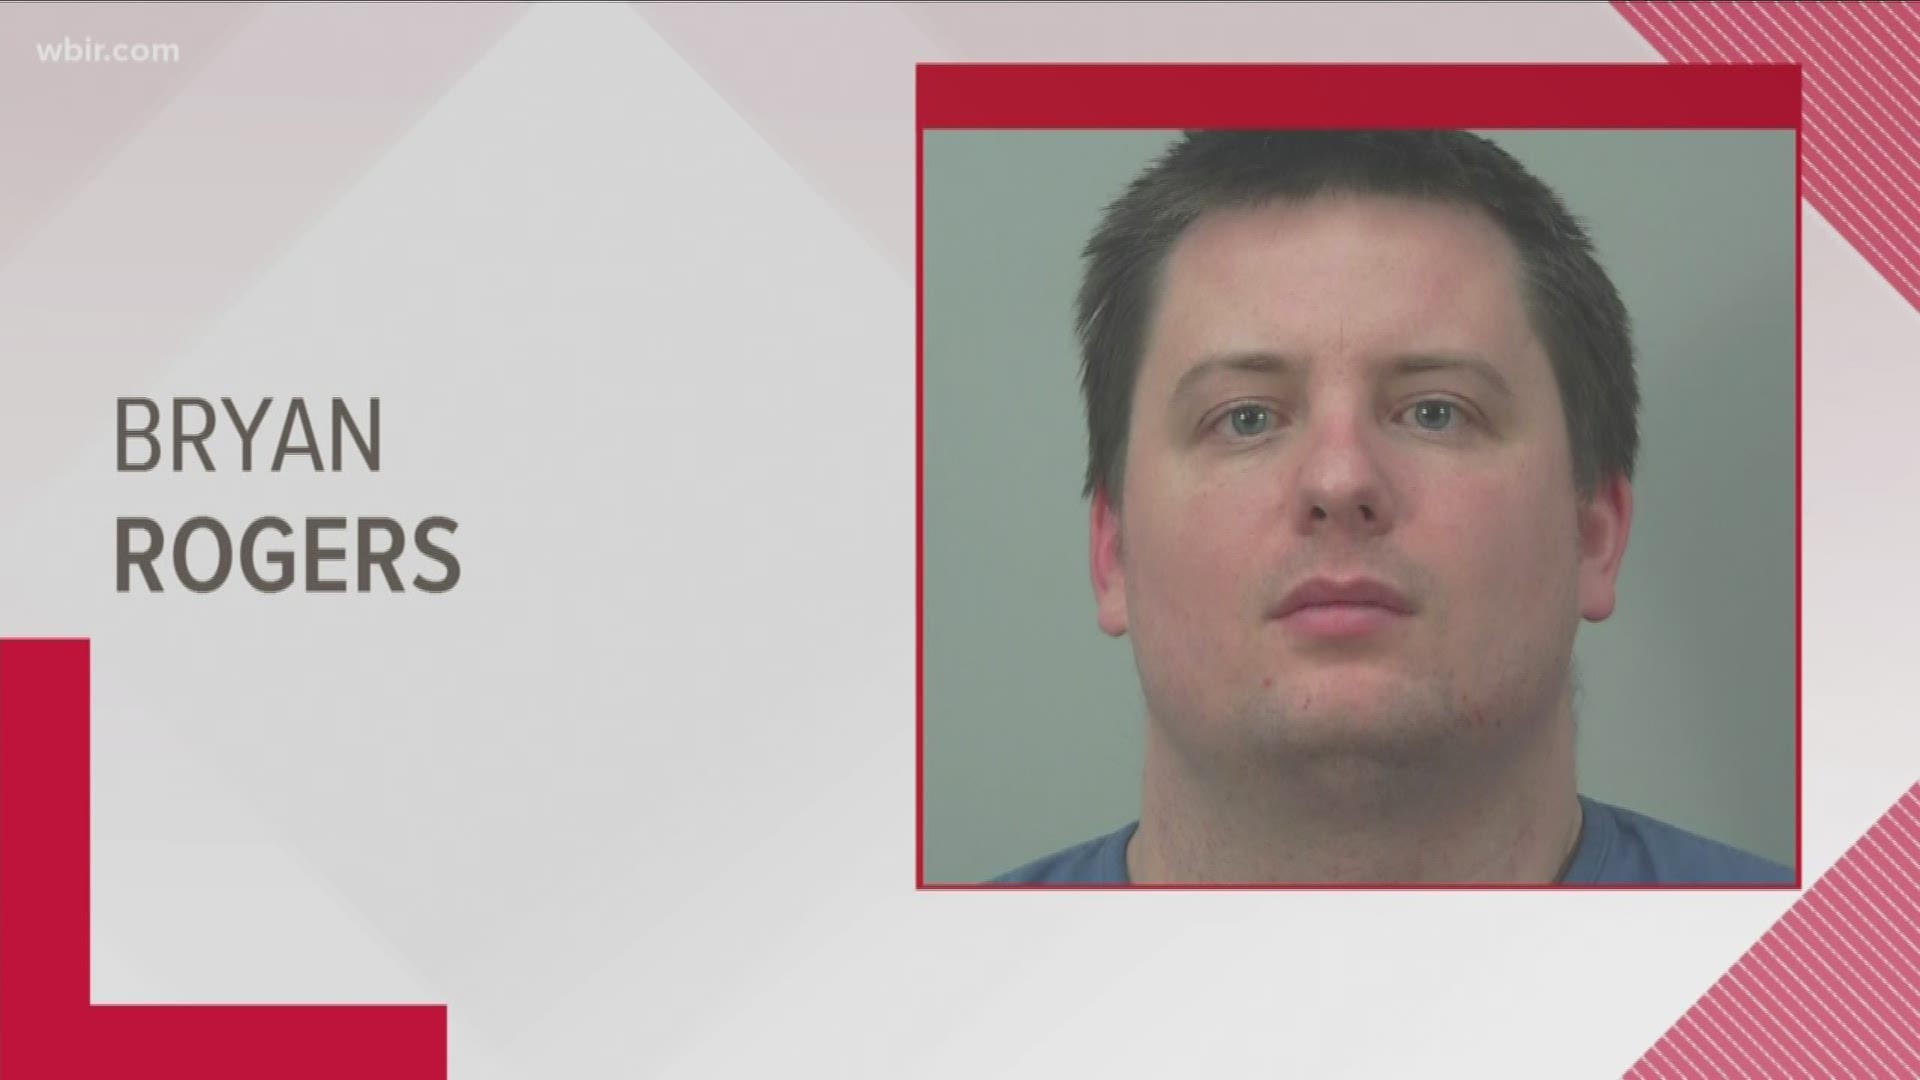 The Wisconsin man who encouraged a 14-year-old Tennessee girl to make a video of alleged abuse by her adoptive father and then brought her to Wisconsin must spend more than 11 years in prison.